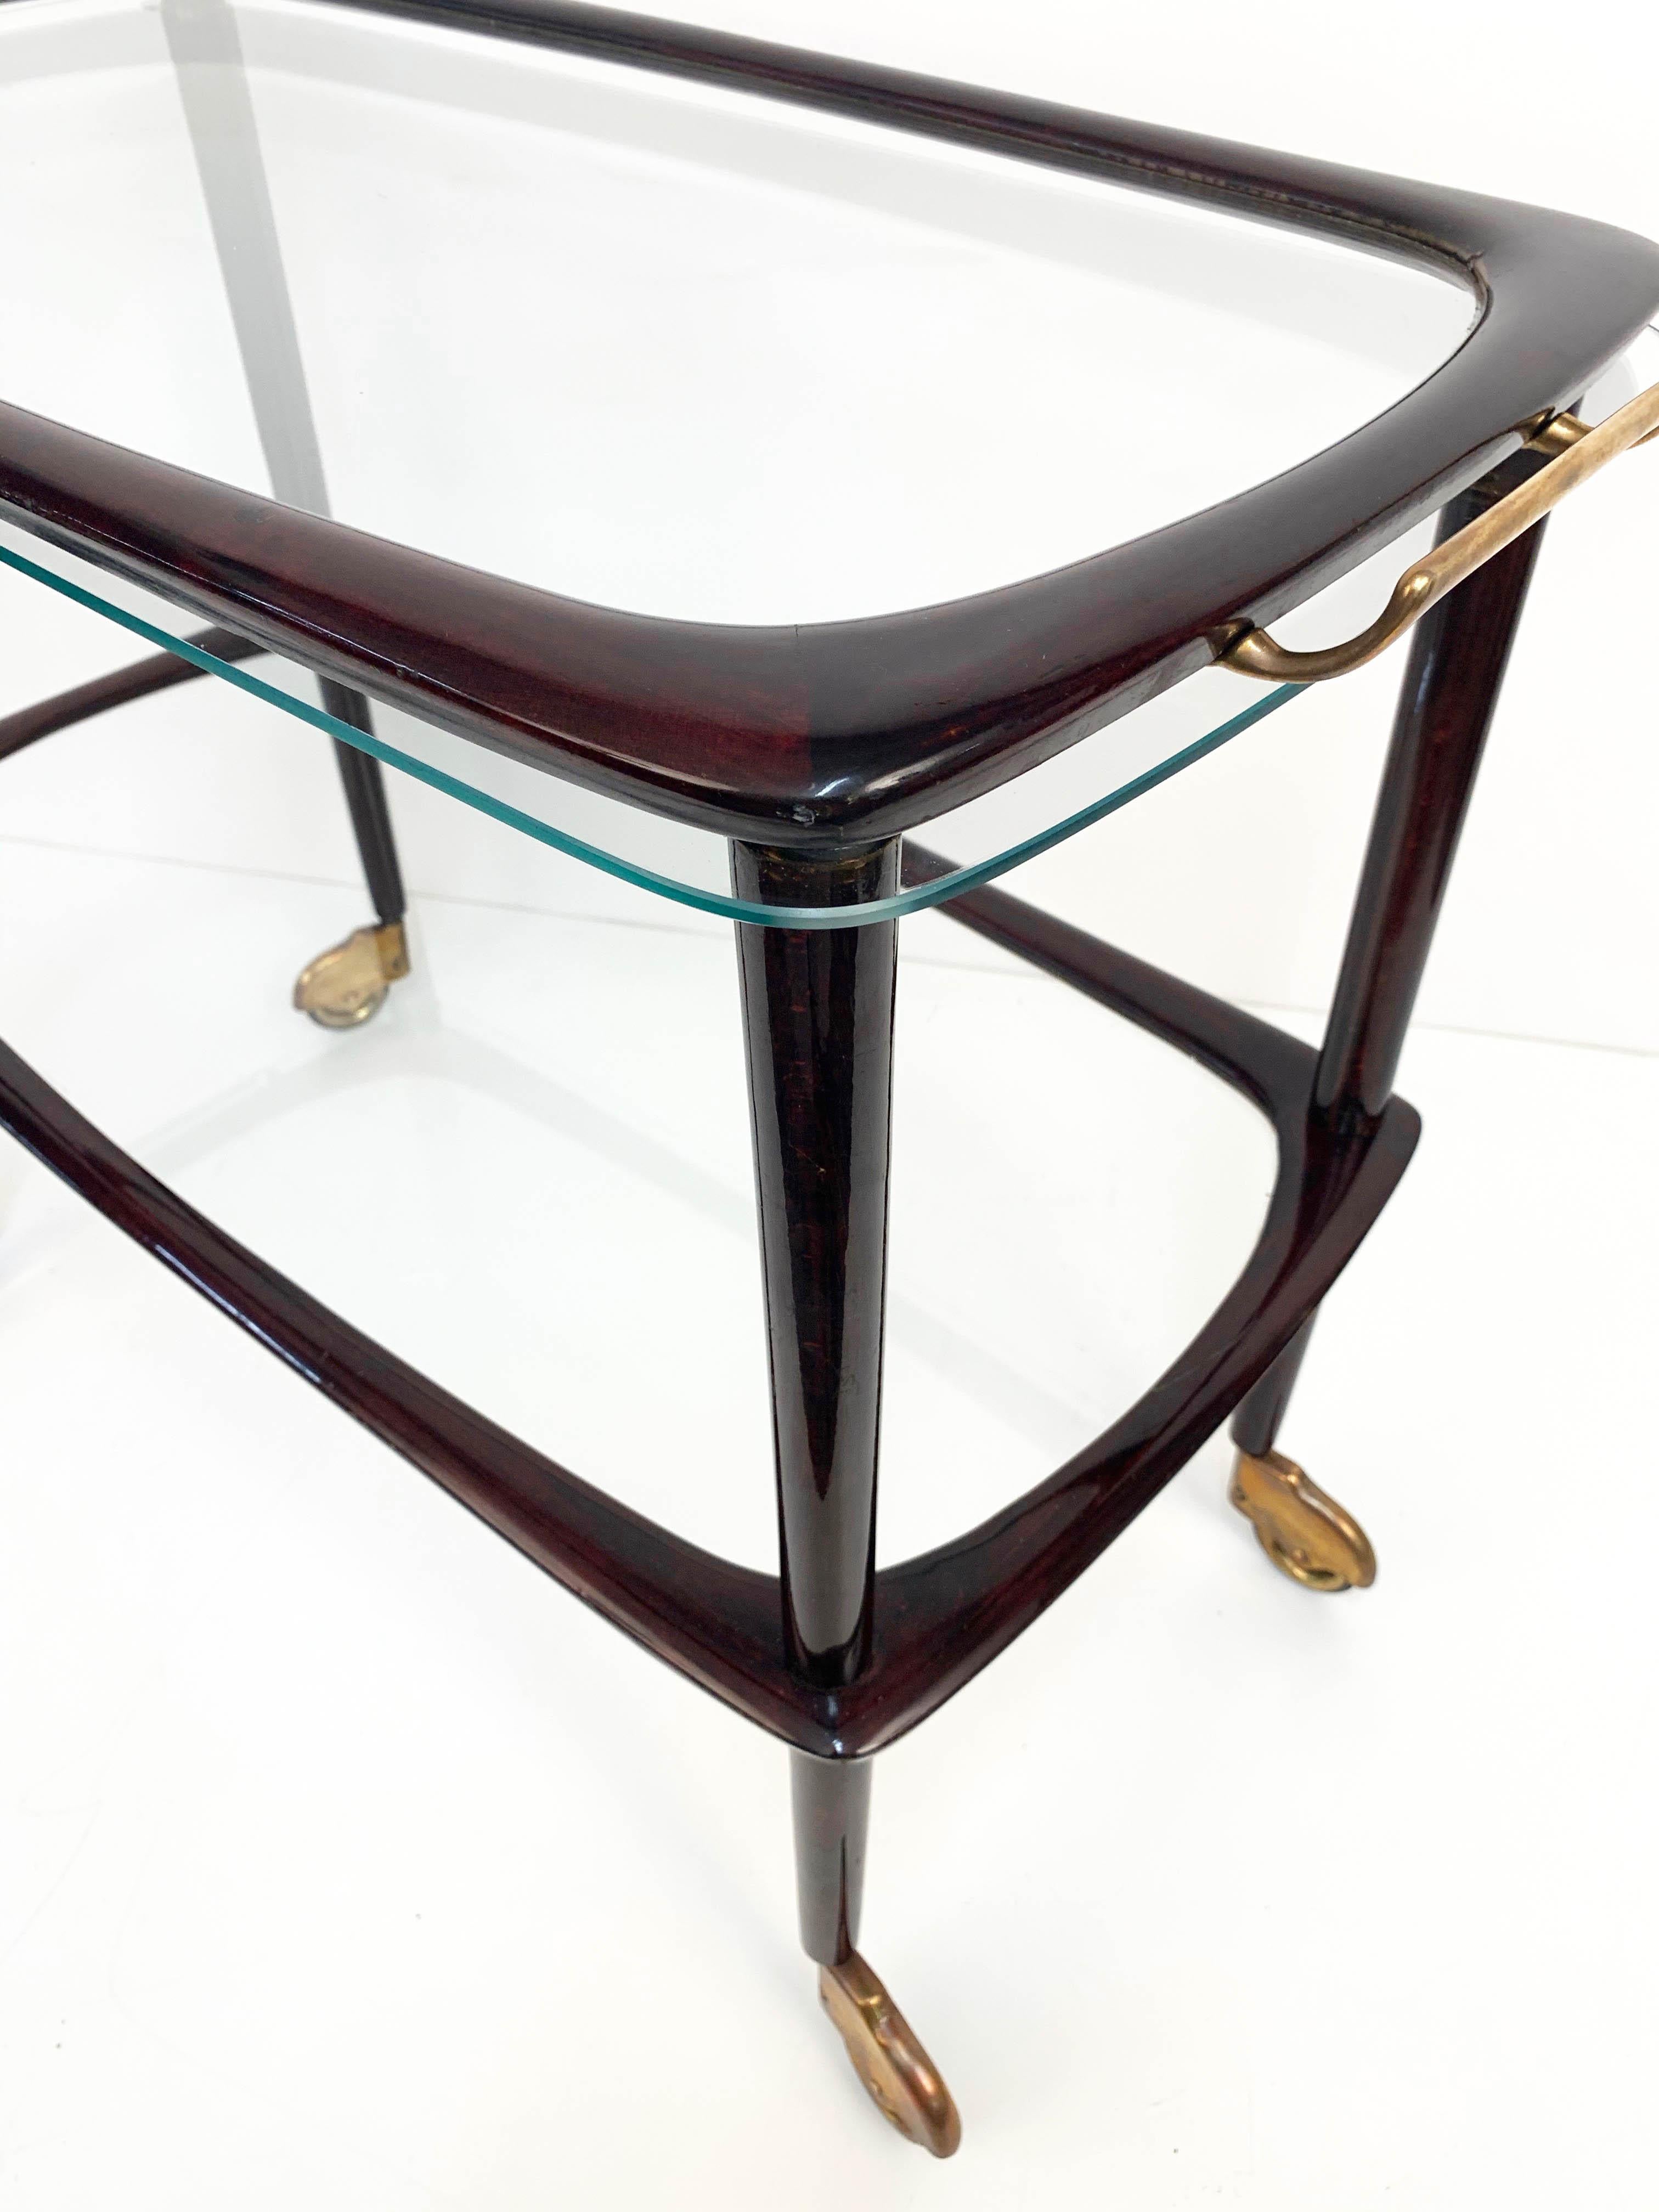 Midcentury Cesare Lacca Wood Italian Bar Cart with Glass Serving Tray, 1950s For Sale 10